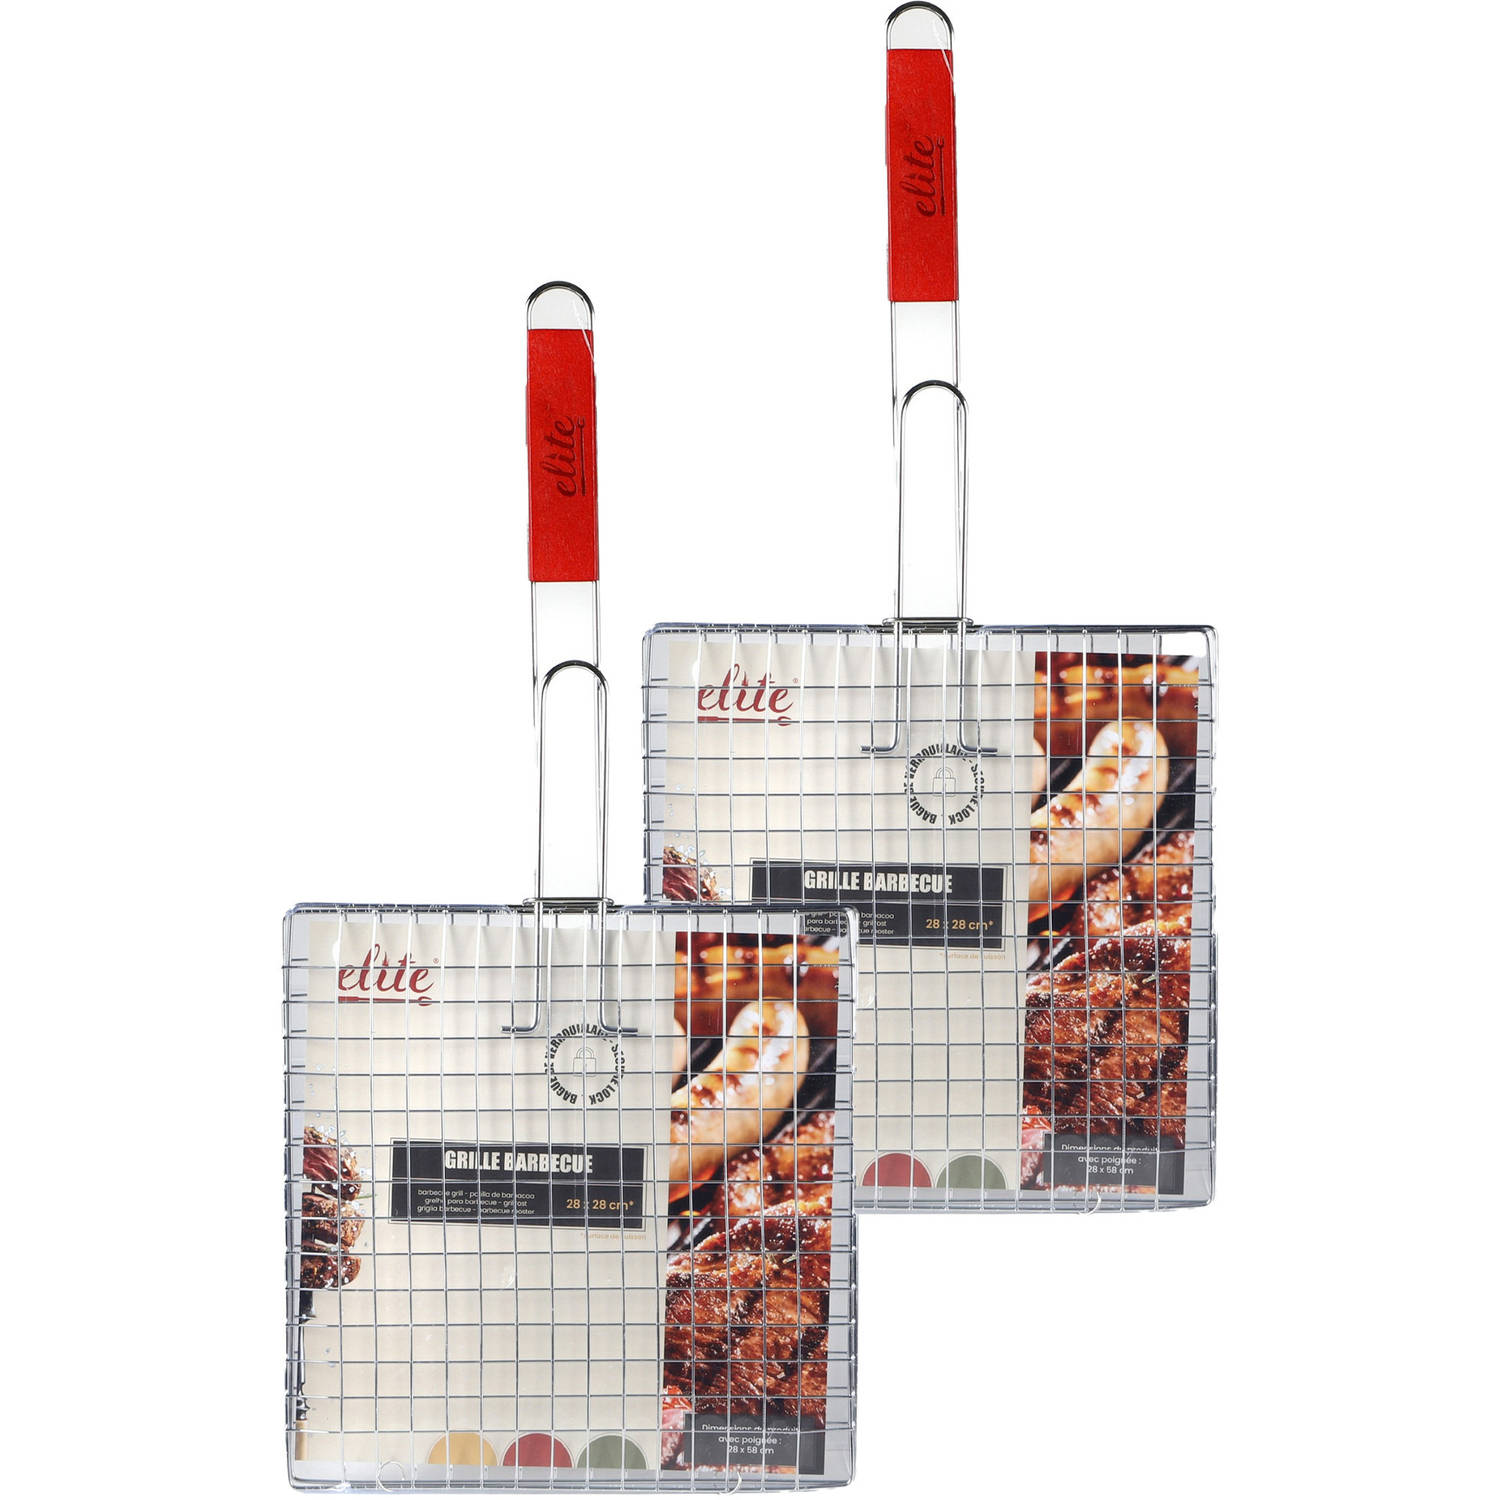 Elite BBQ/barbecue rooster - 2x - klem grill - metaal/hout - 28 x 58 x 1 cm - barbecueroosters